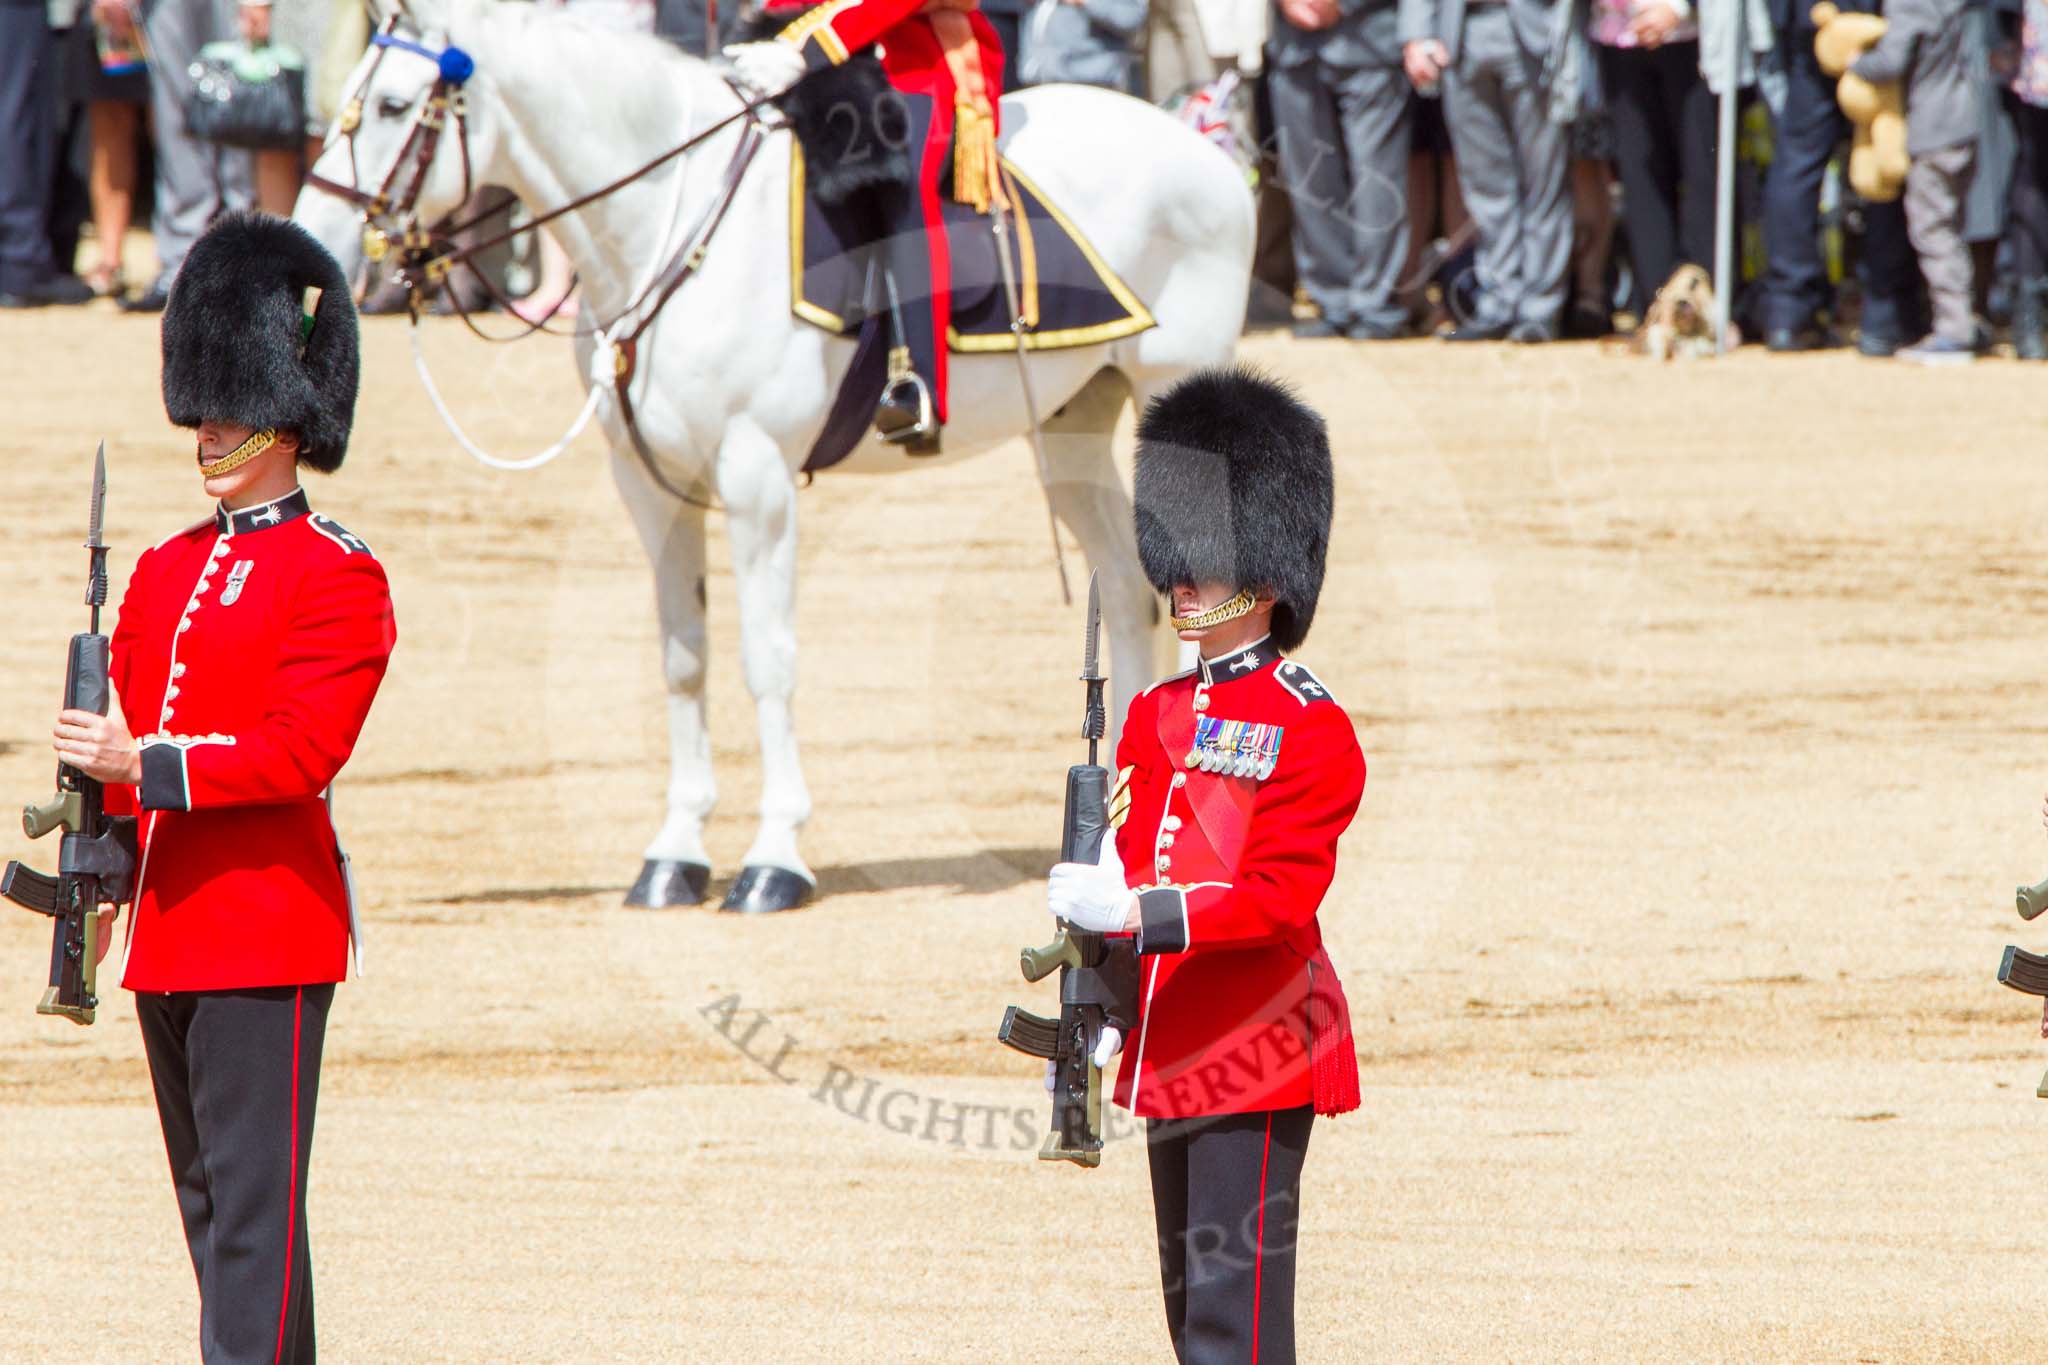 Trooping the Colour 2013: The Regimental Sergeant Major, WO1 Martin Topps, Welsh Guards, one of the two (unnamed) sentries, and the Colour Sergeant, R J Heath, Welsh Guards, presenting arms. Image #466, 15 June 2013 11:21 Horse Guards Parade, London, UK